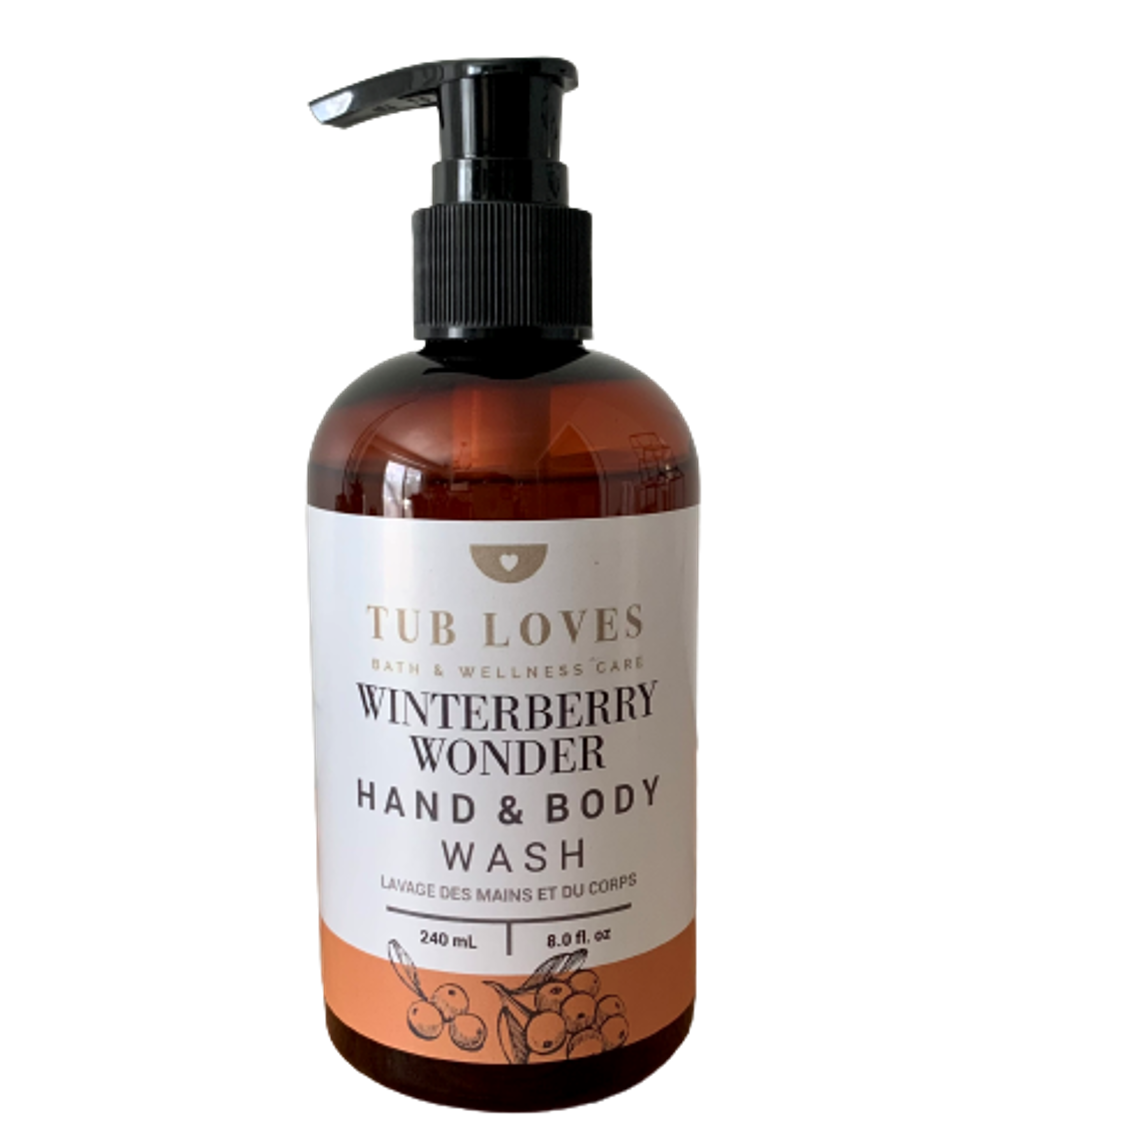 Winterberry Wonder - Hand and Body Wash - Tub Loves